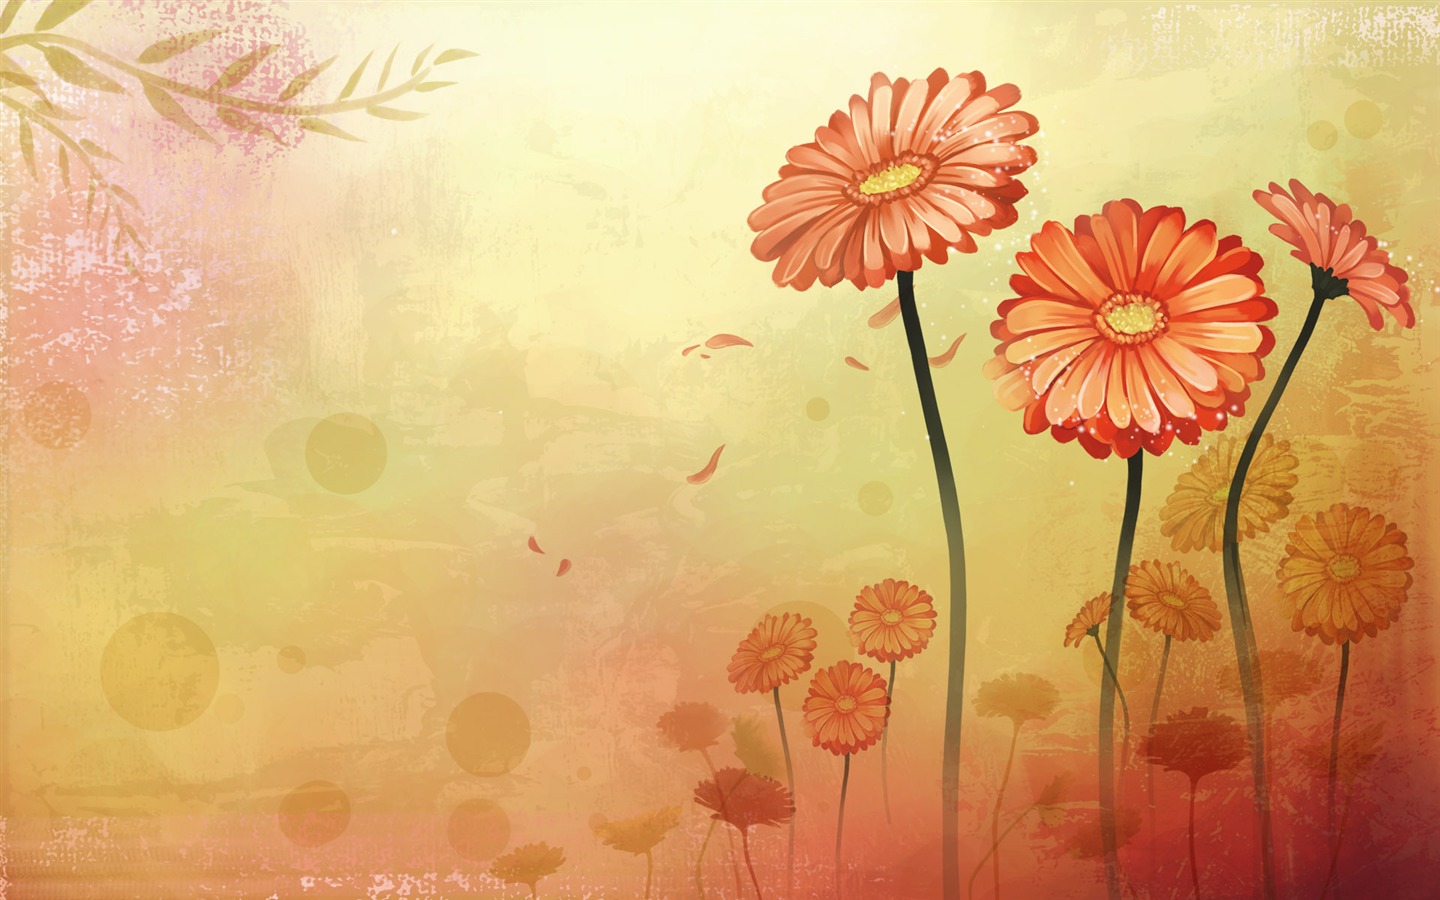 Synthetic Wallpaper Colorful Flower #28 - 1440x900